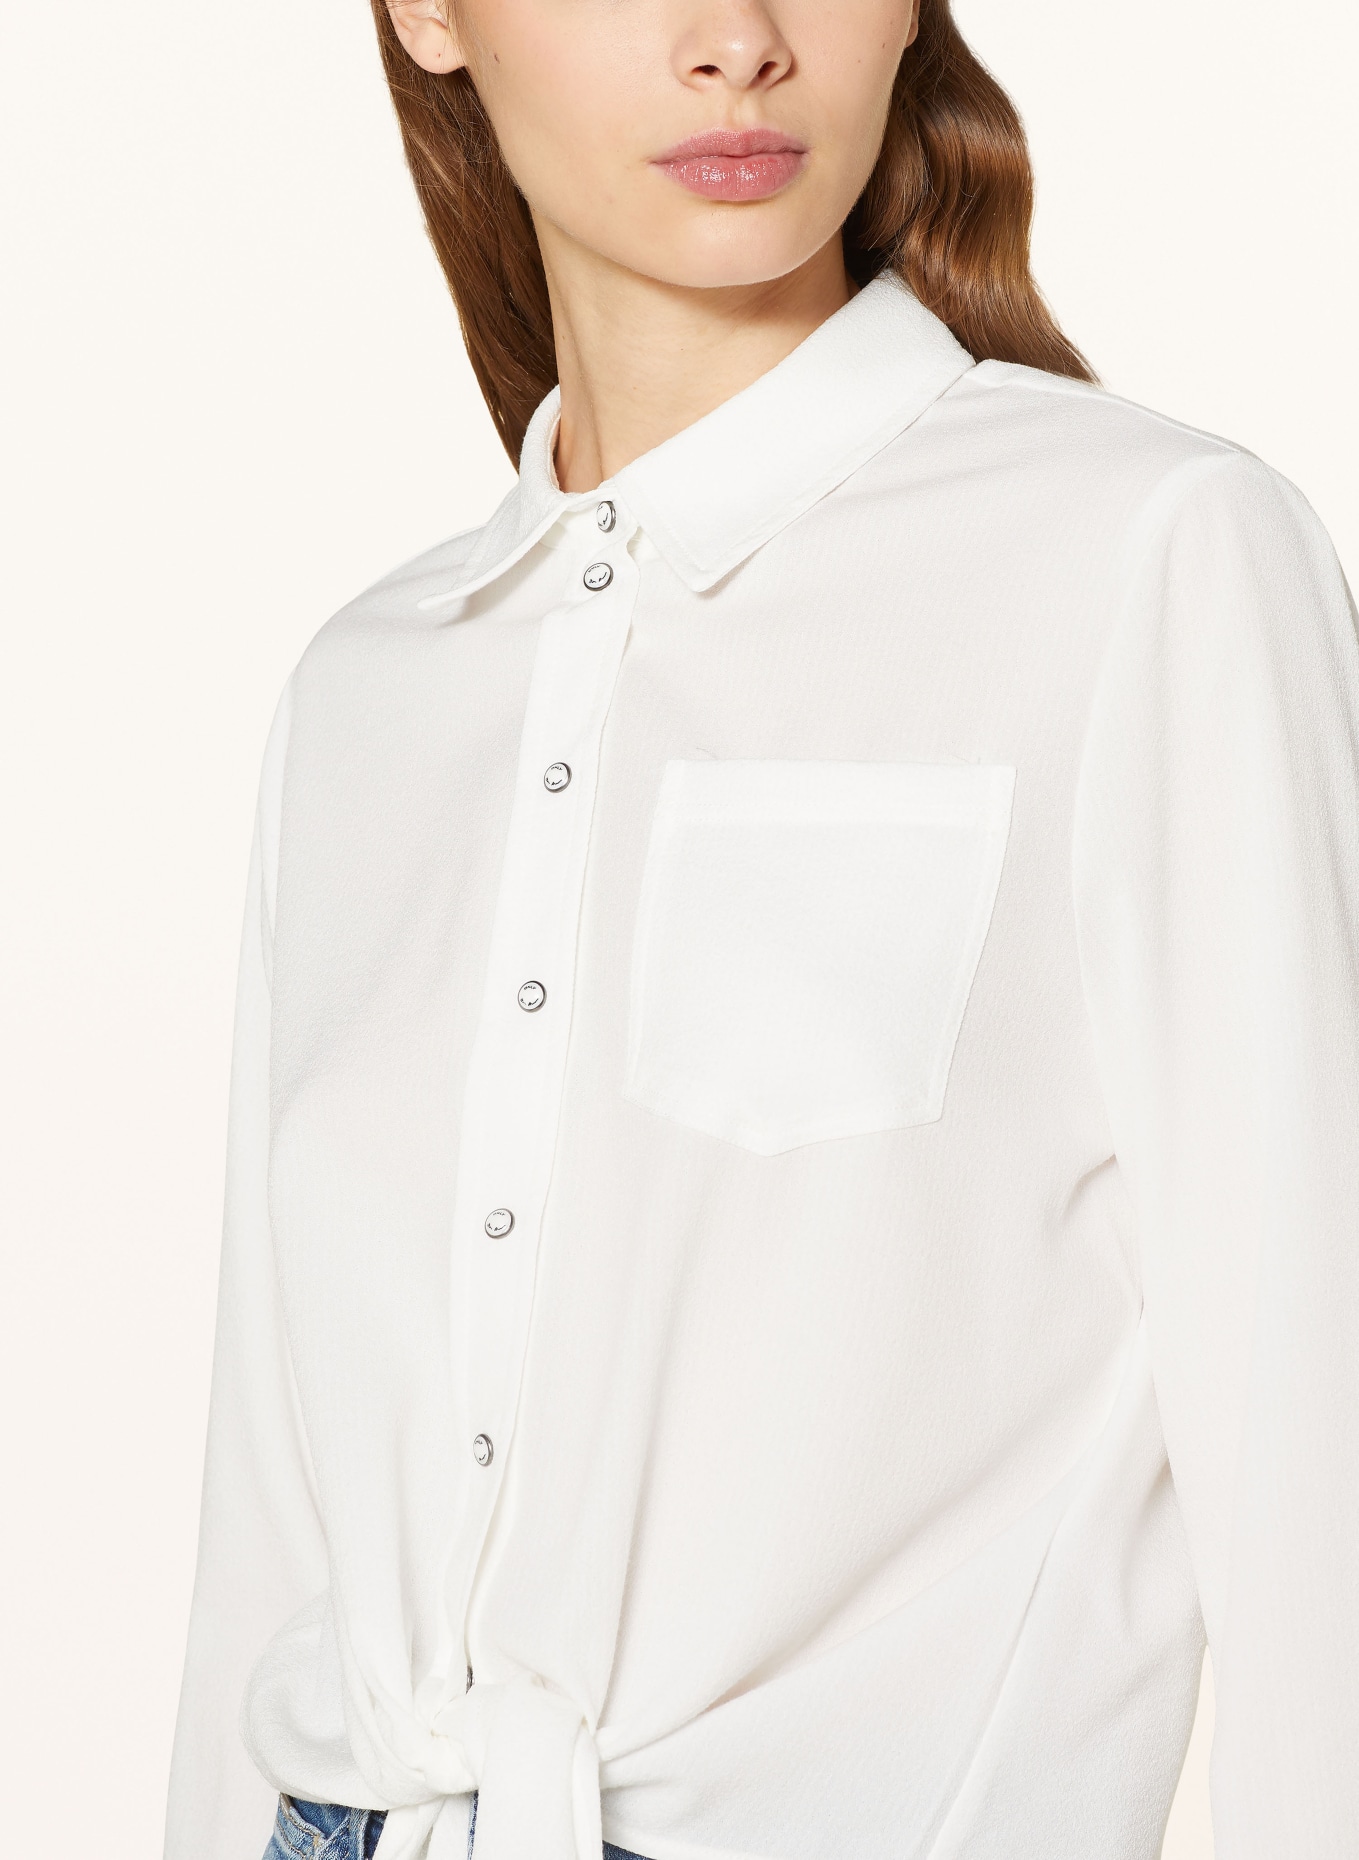 ONLY Shirt blouse, Color: WHITE (Image 4)